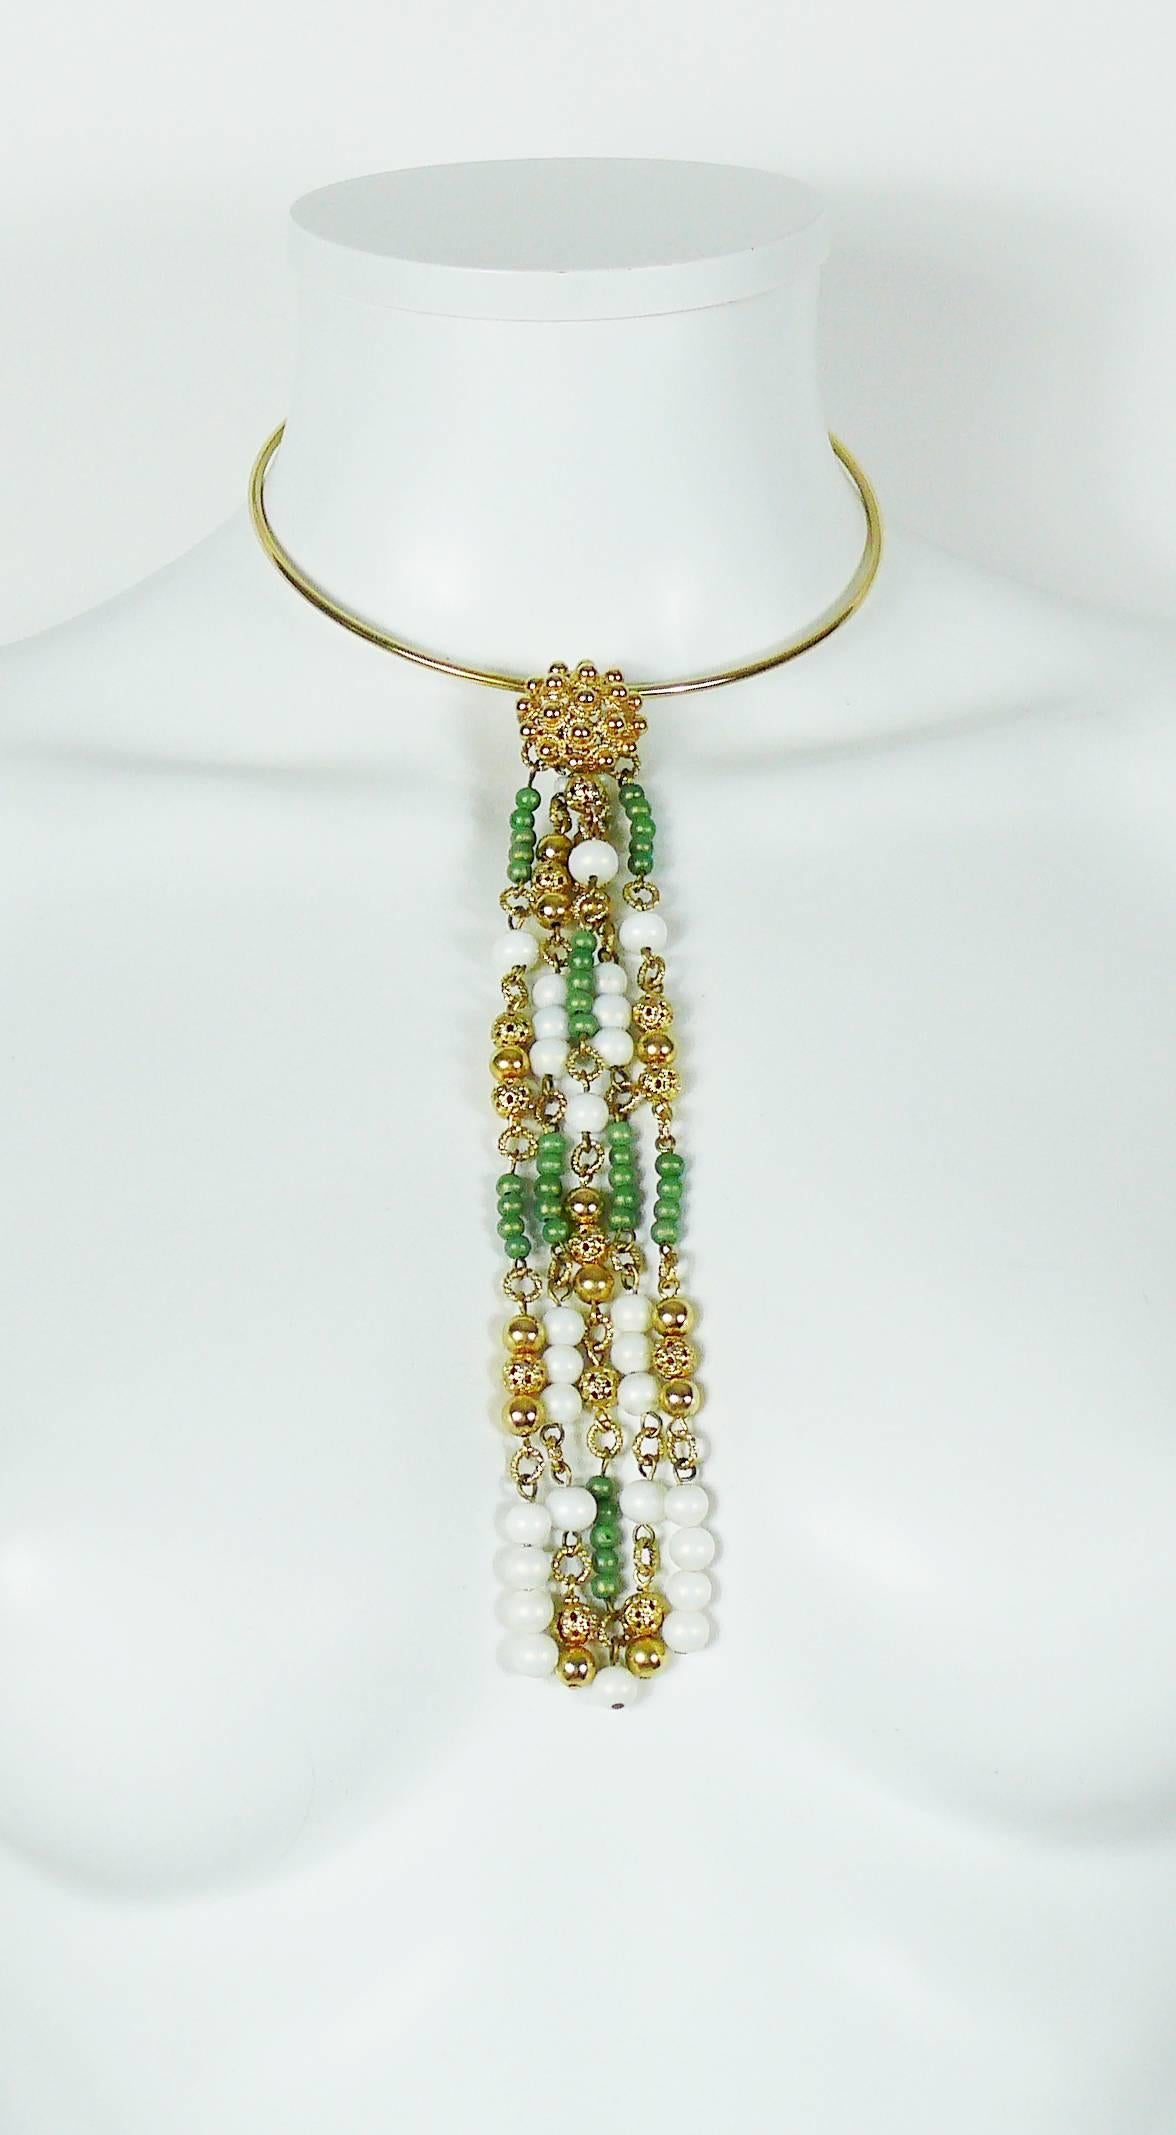 CHRISTIAN DIOR vintage collar necklace featuring a long pendant with glass (white, green) and gold toned beads.

MARC BOHAN era.

Dated 1969.
Marked CHR. DIOR Germany.

Indicative measurements : inner circumference approx. 38.01 cm (14.96 inches -